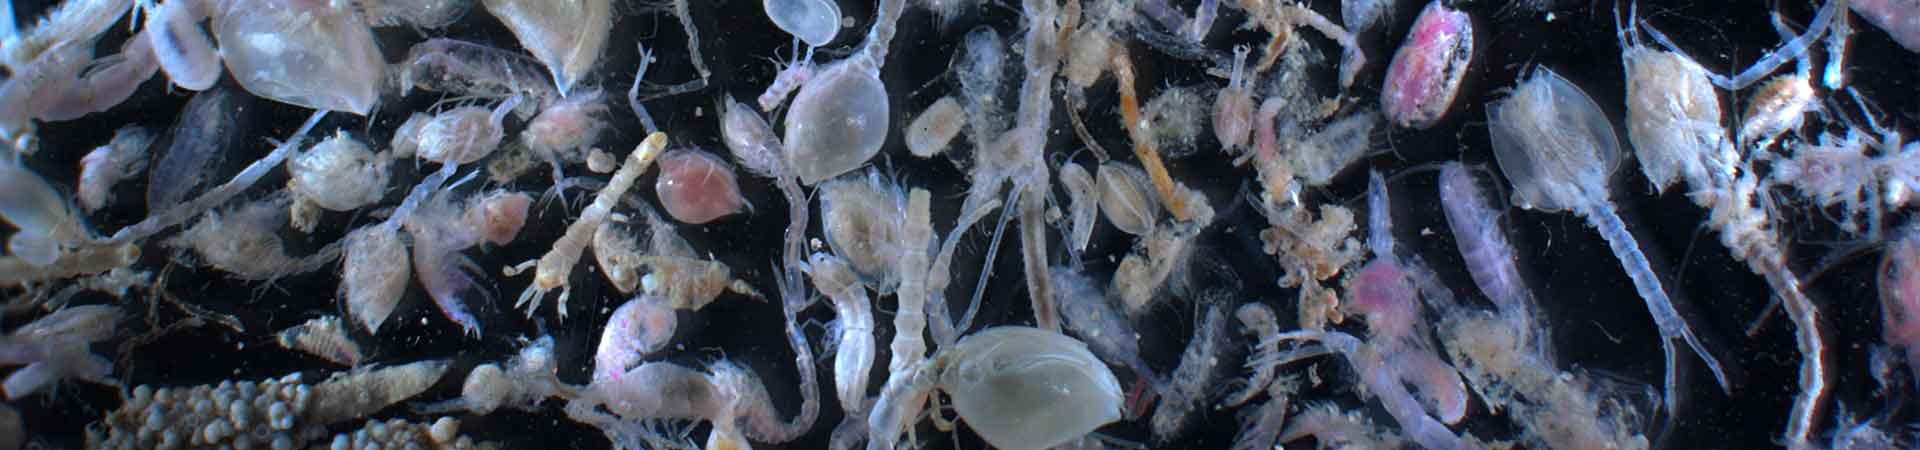 Small crustaceans picked out from a sediment sample